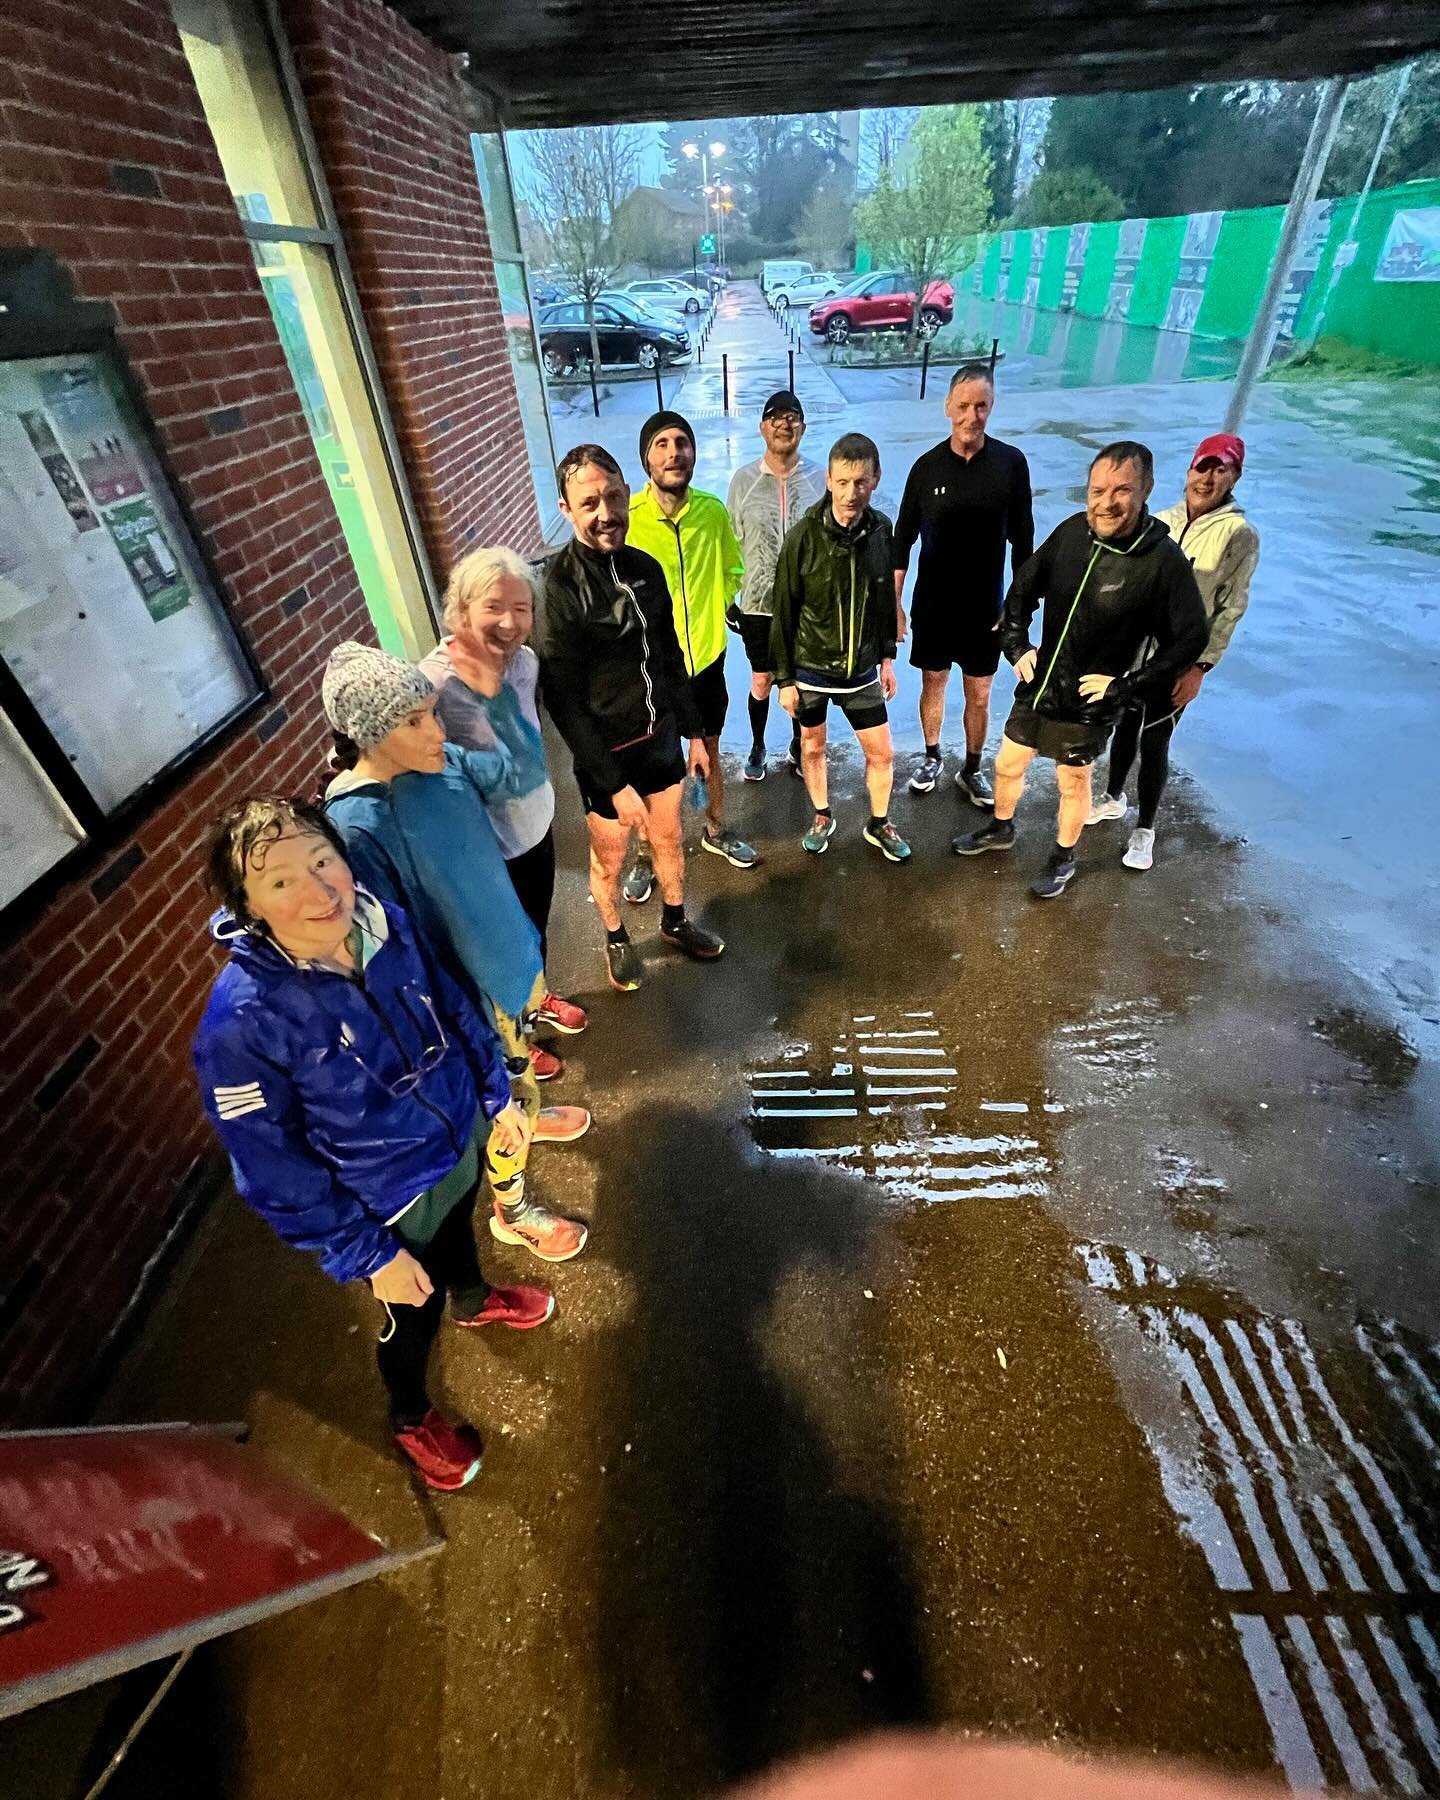 Who said it was raining? We hardly noticed on our Tuesday night run 😂😂🌧️🌧️ Feeling fresh in the face afterwards!
@midhurst.milers #trailrunning #running #midhurst